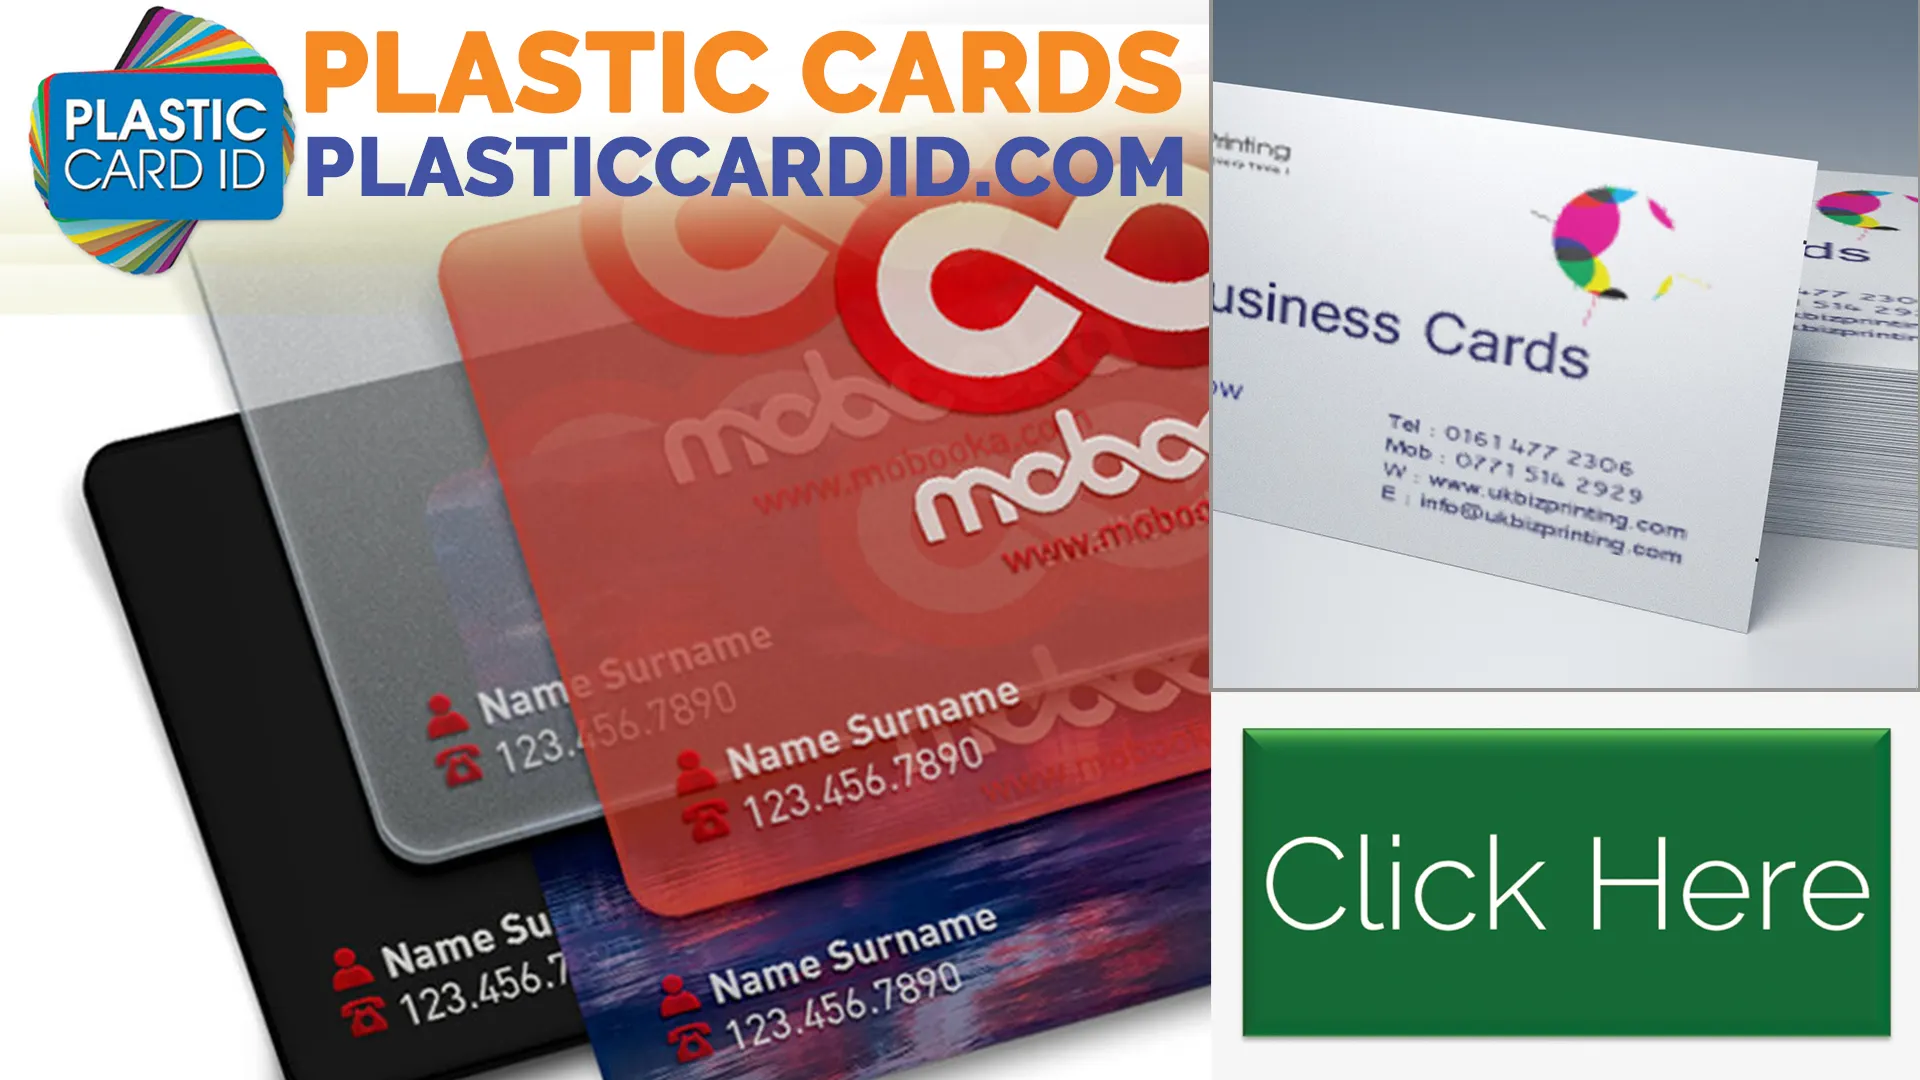 Welcome to the World of Enhanced Plastic Card Security with Plastic Card ID




